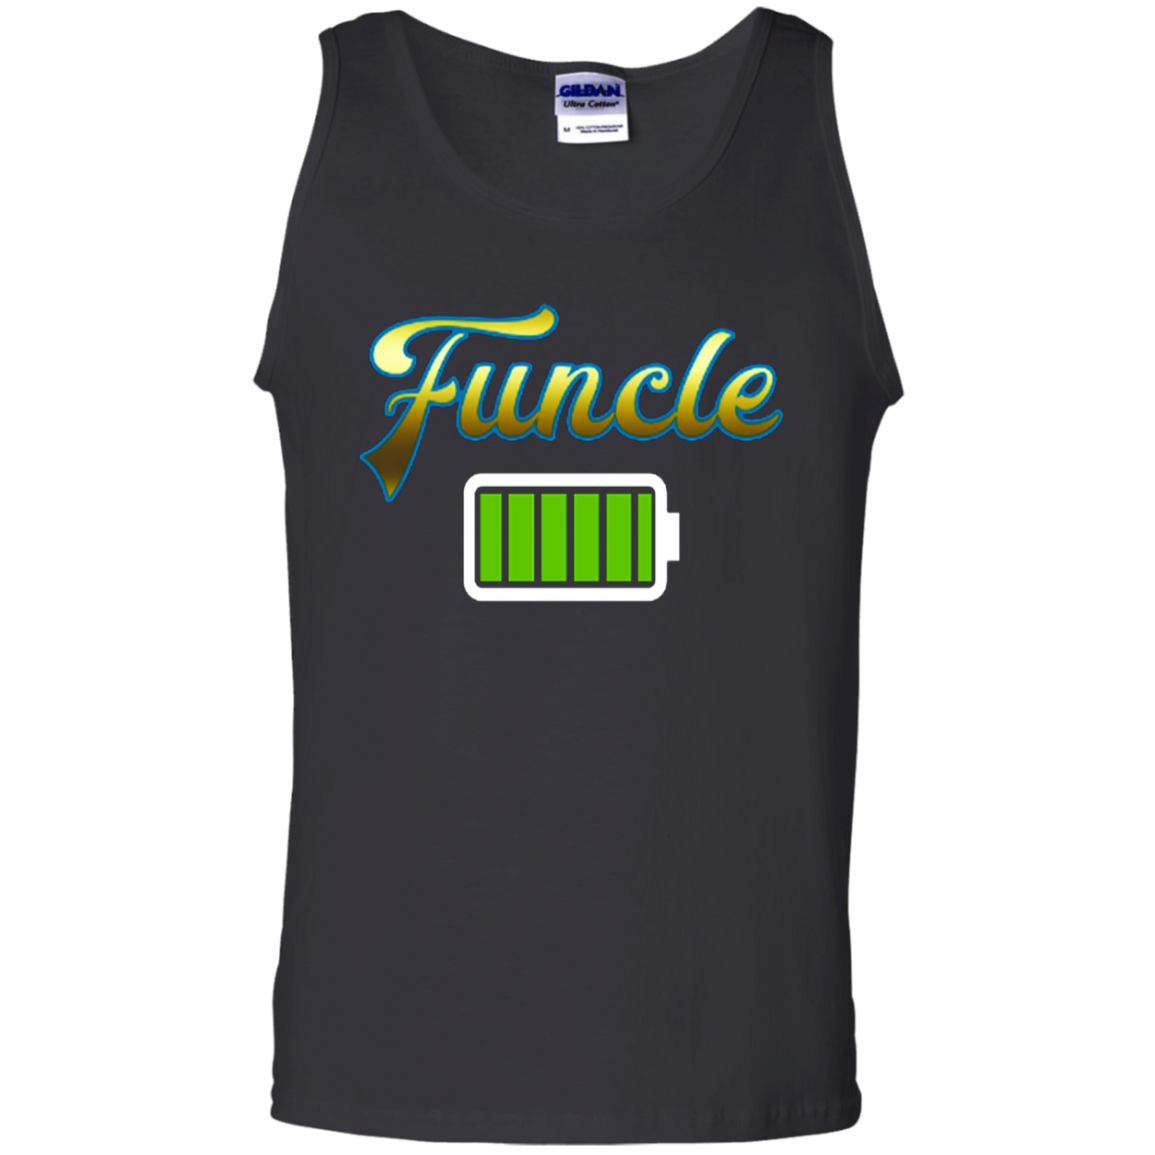 Funcle - Funny Uncle - Full Battery Funny Gift Joke Shirt G220 Tank Top